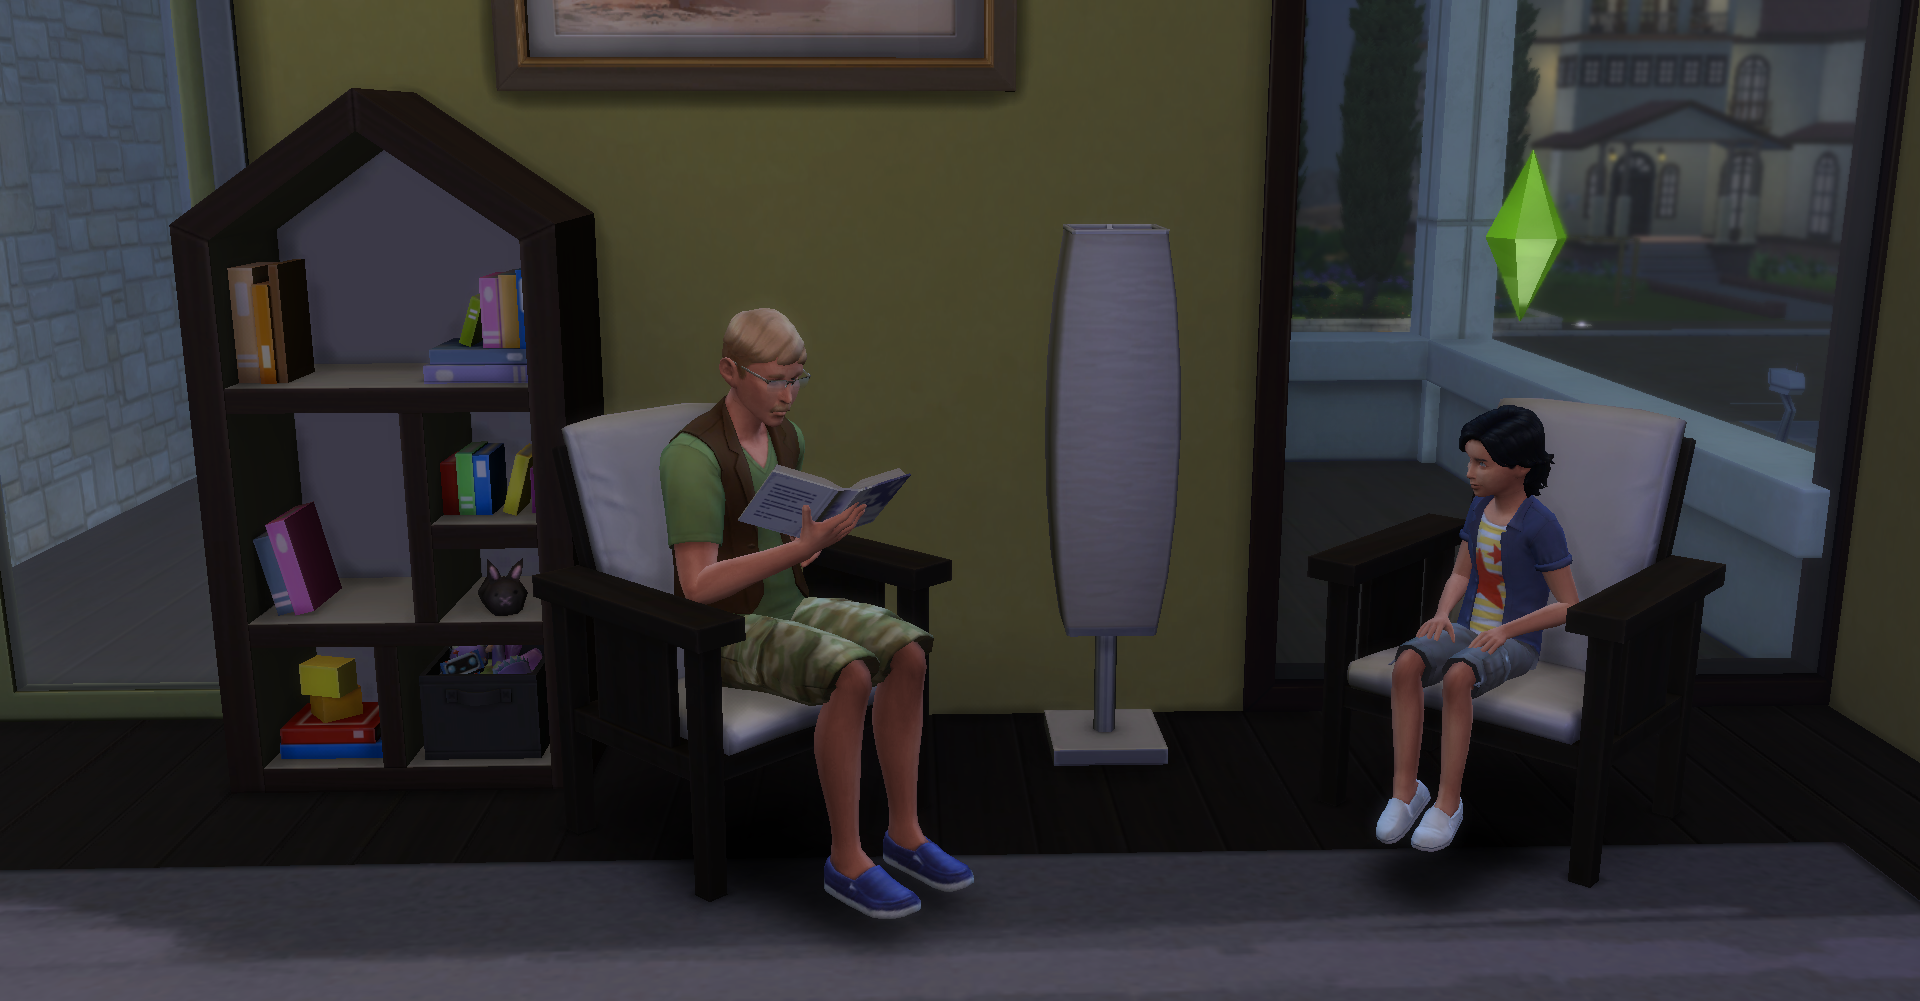 Hot Complications Sims Story Page 6 The Sims 4 General Discussion